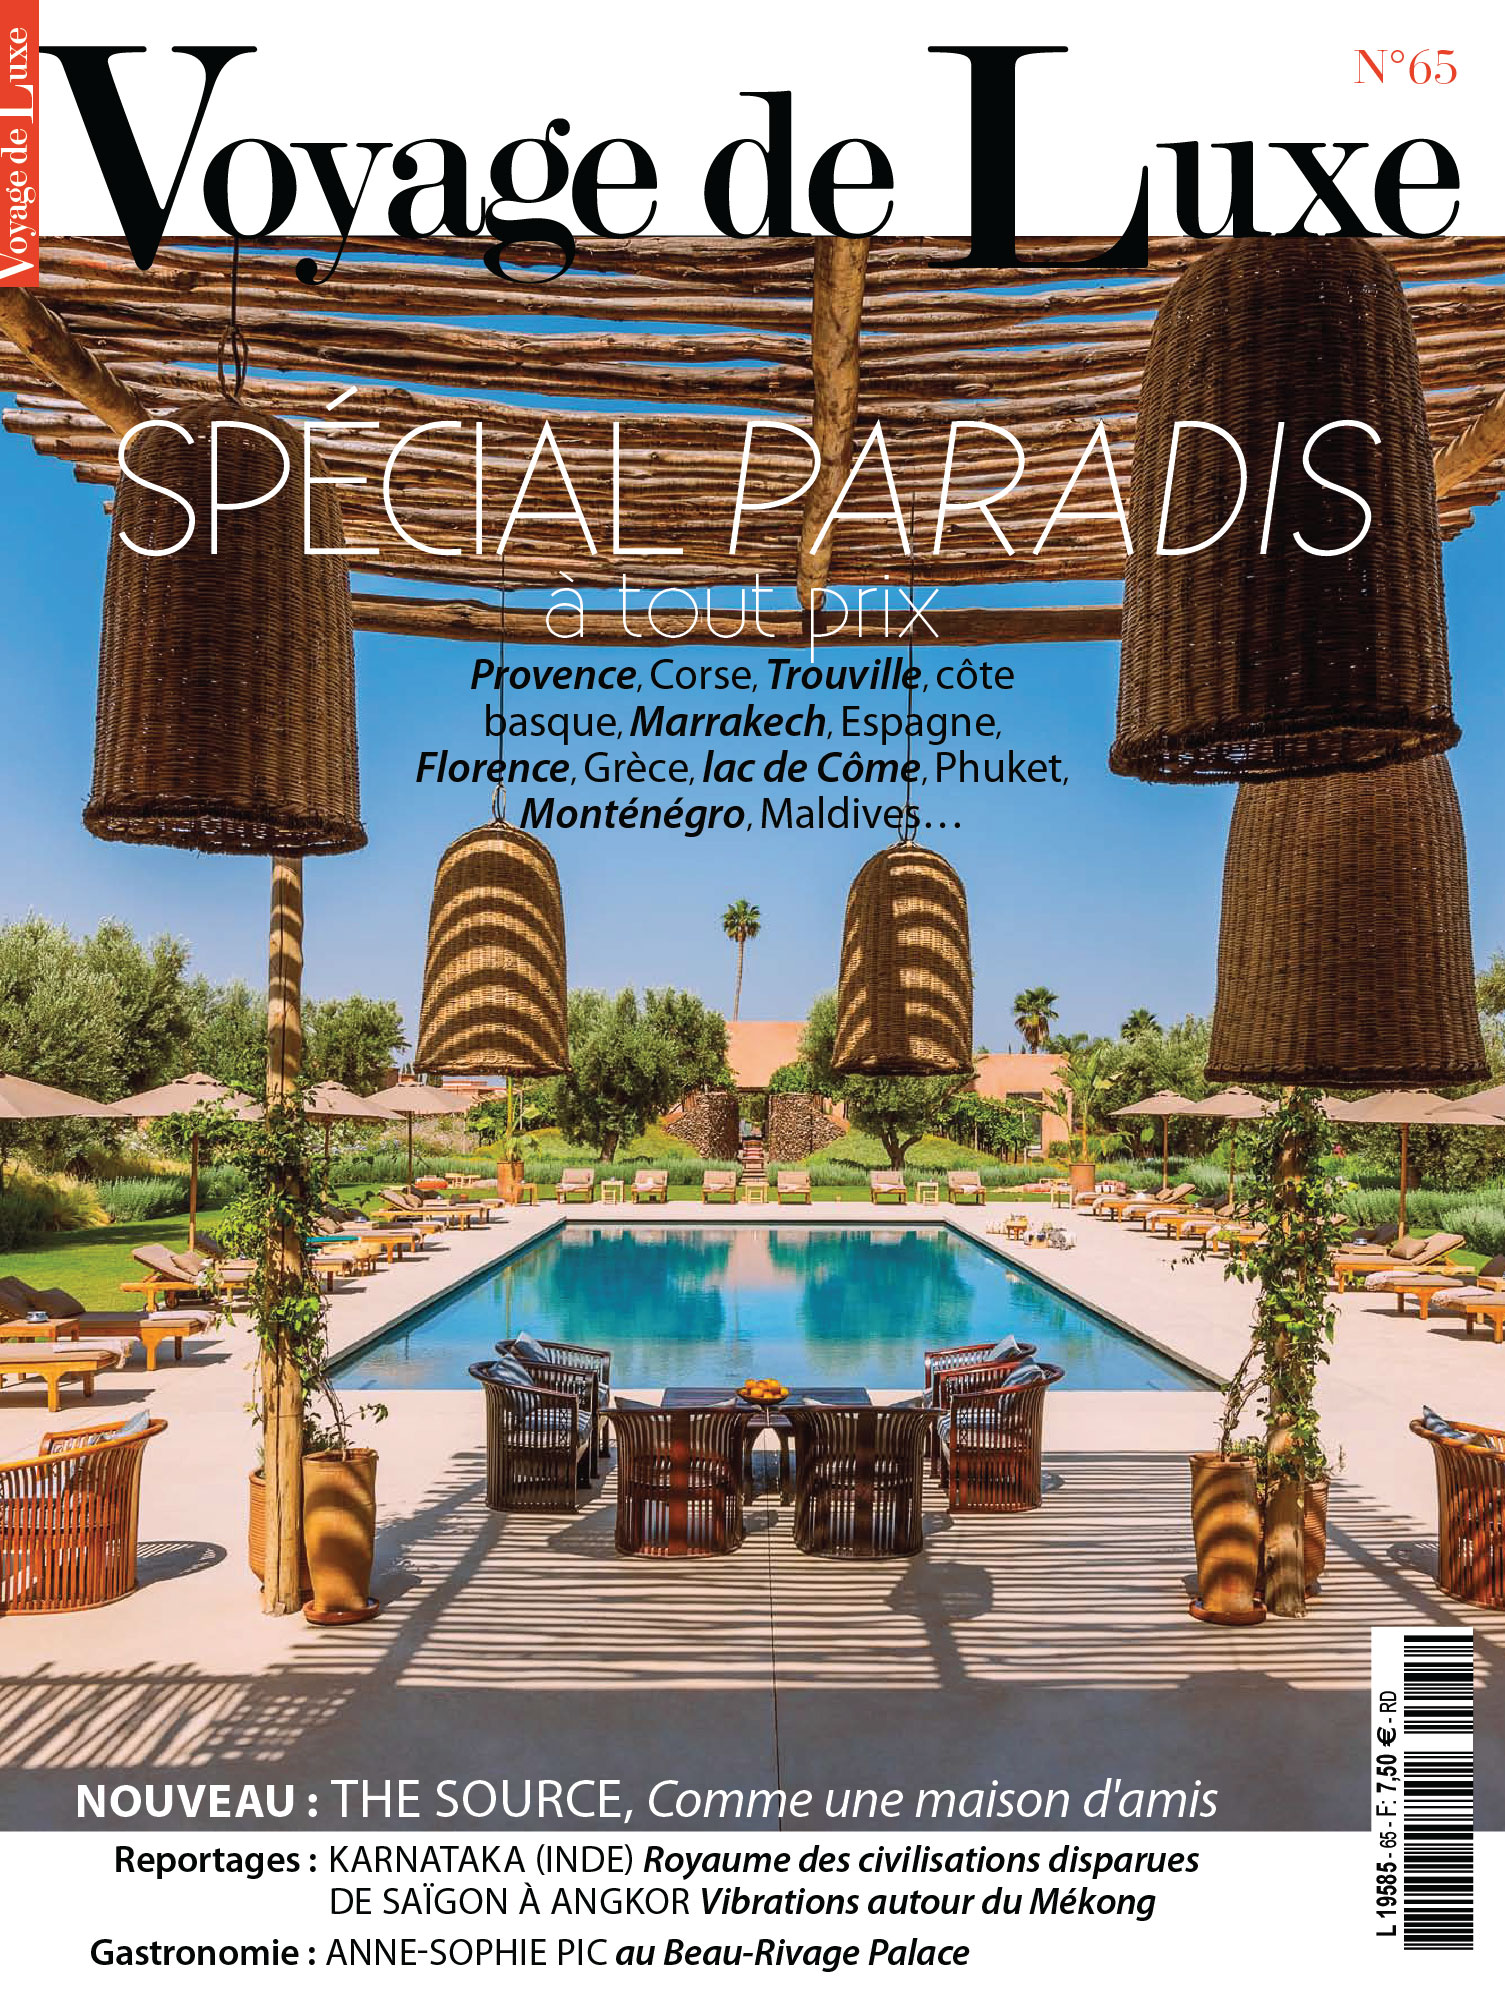 cover of the magazine voyage de luxe july 2015